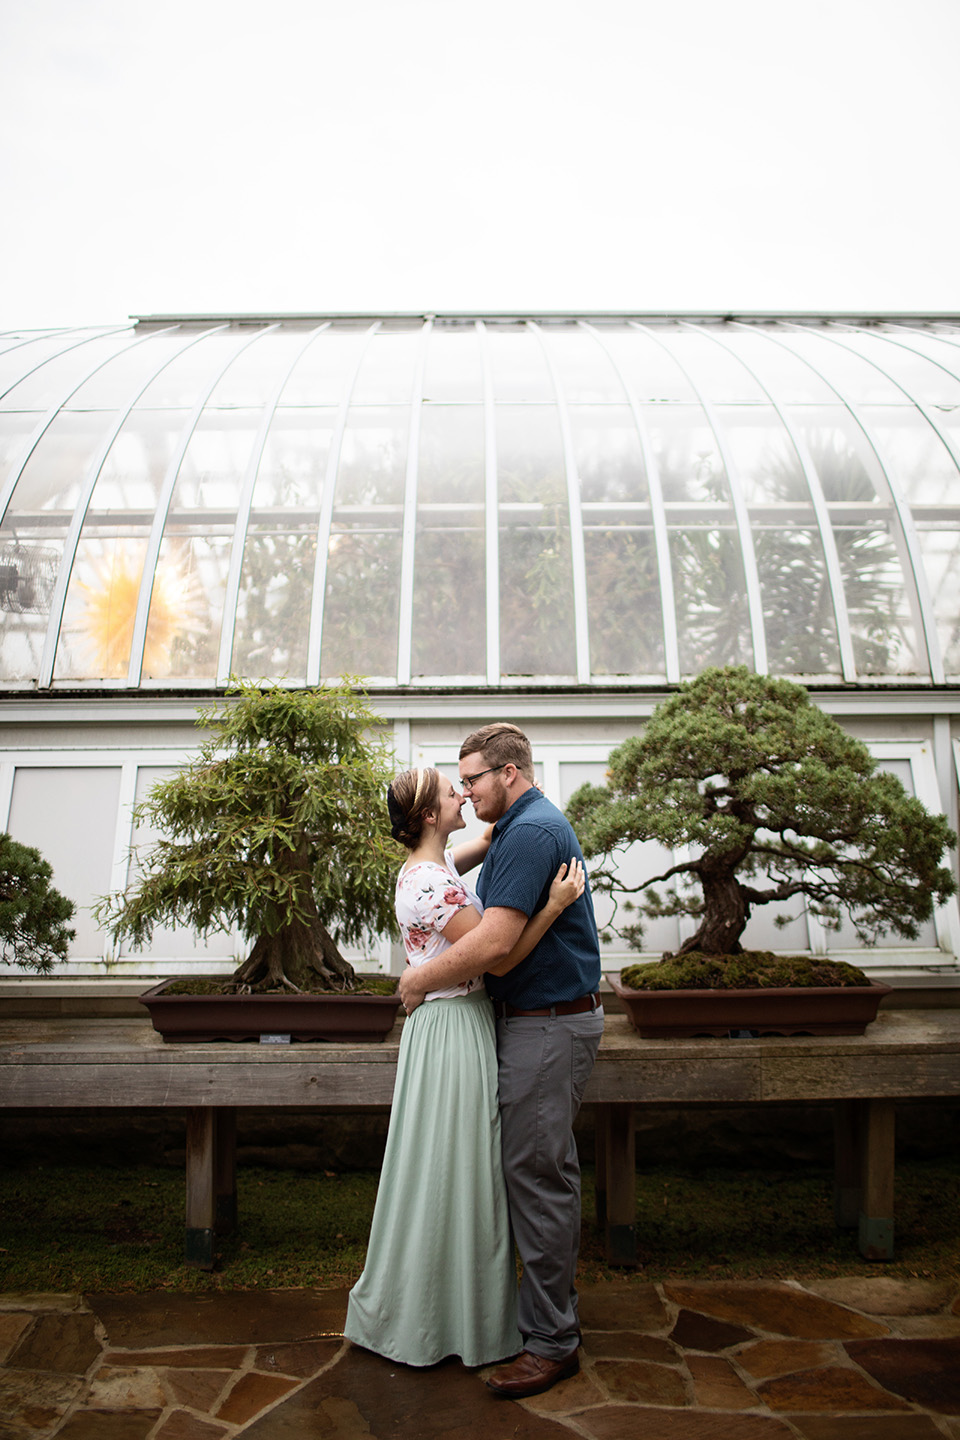 PHIPPS CONSERVATORY ENGAGEMENT PHOTO SESSION-PITTSBURGH, PA-LORENE+DUANE- 08